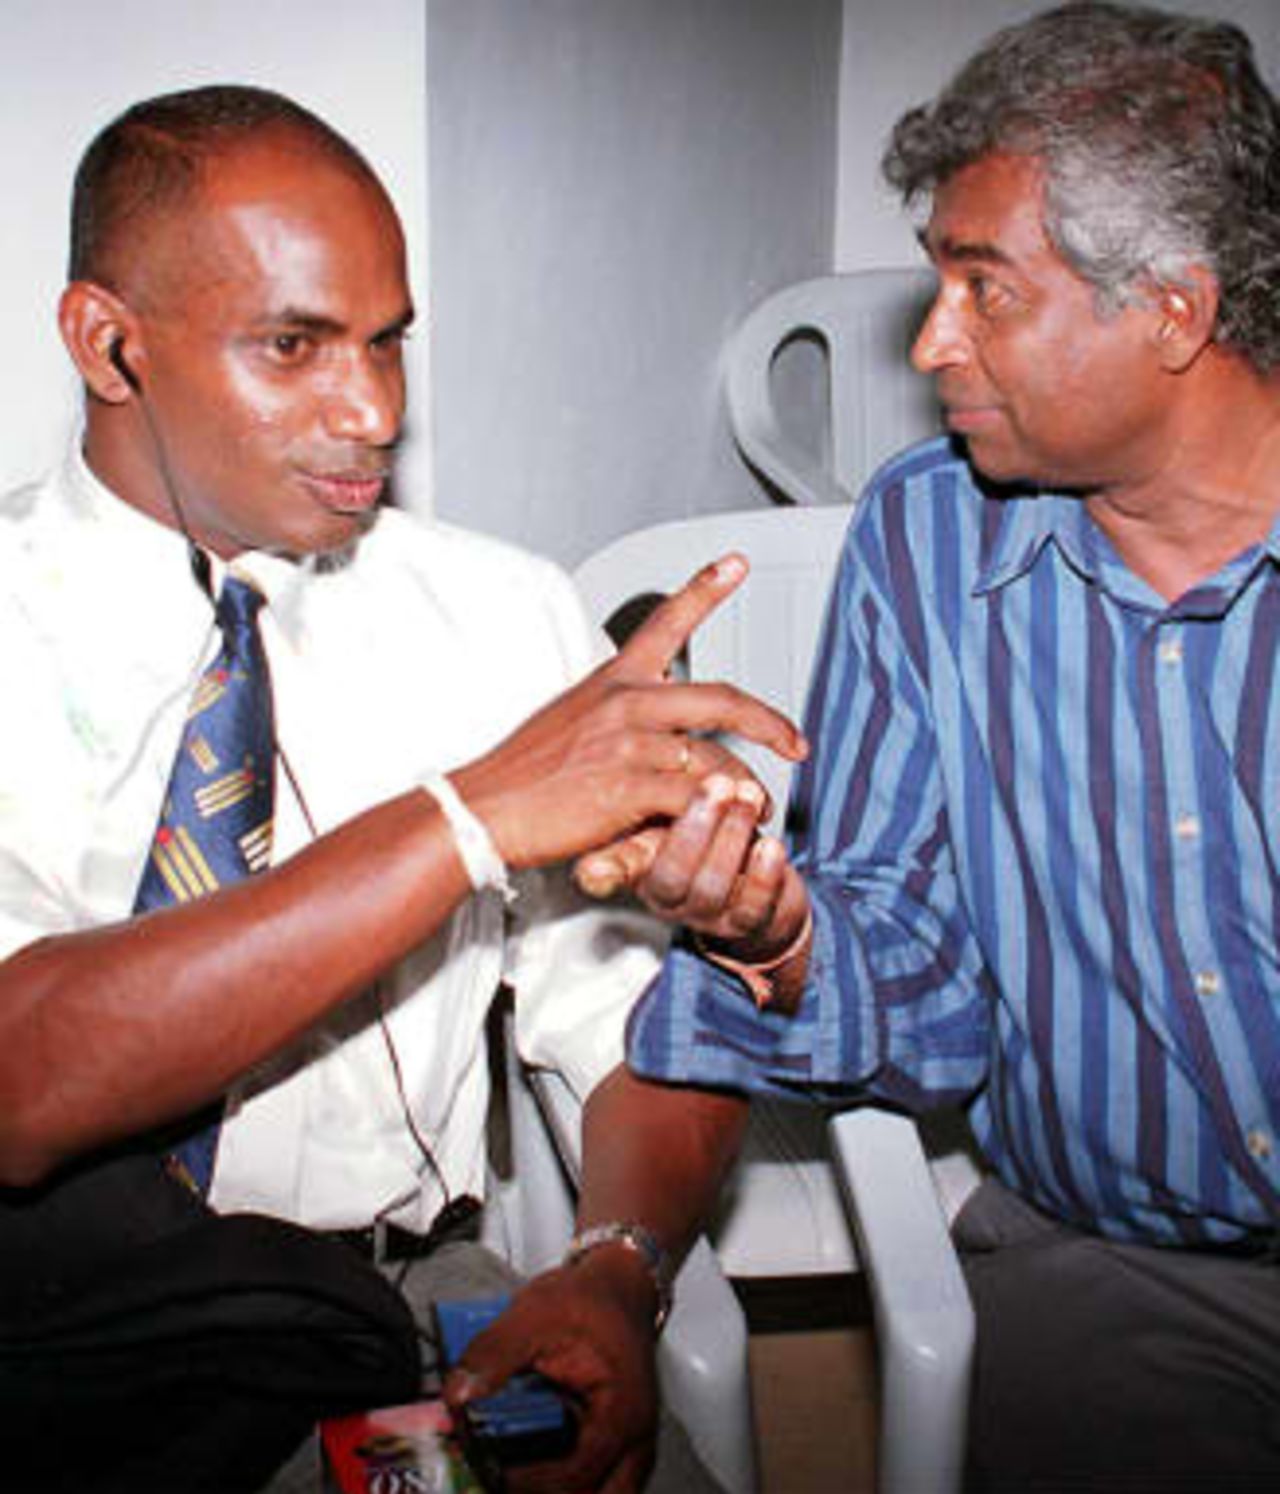 Sri Lanka's former master blaster Sanath Jayasuriya (L) wears the earphone of a cellular telephone as he speaks with top local cricket commentator Palitha Perera 24 April 1999 just before the Sri Lankan team left for England to defend the country's cricket world cup. The team was knocked out of the first round itself and officials blame mobile phones and wives for the downfall of players. Perera has called for a shakeup of the team